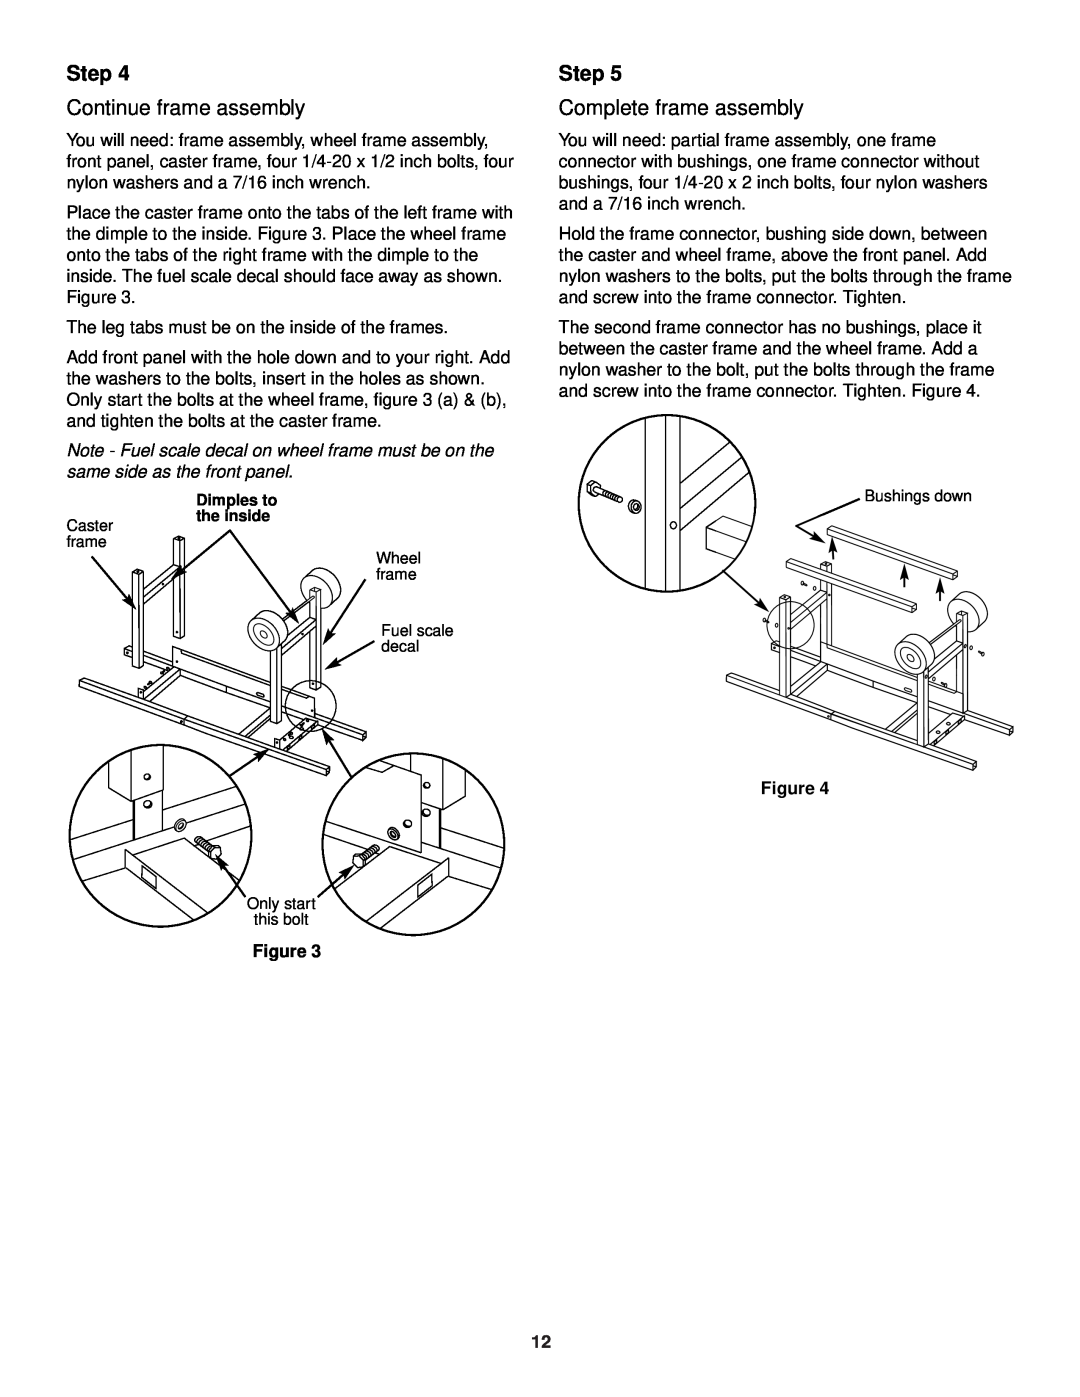 Weber 3400 Series owner manual Step, Continue frame assembly, Complete frame assembly 